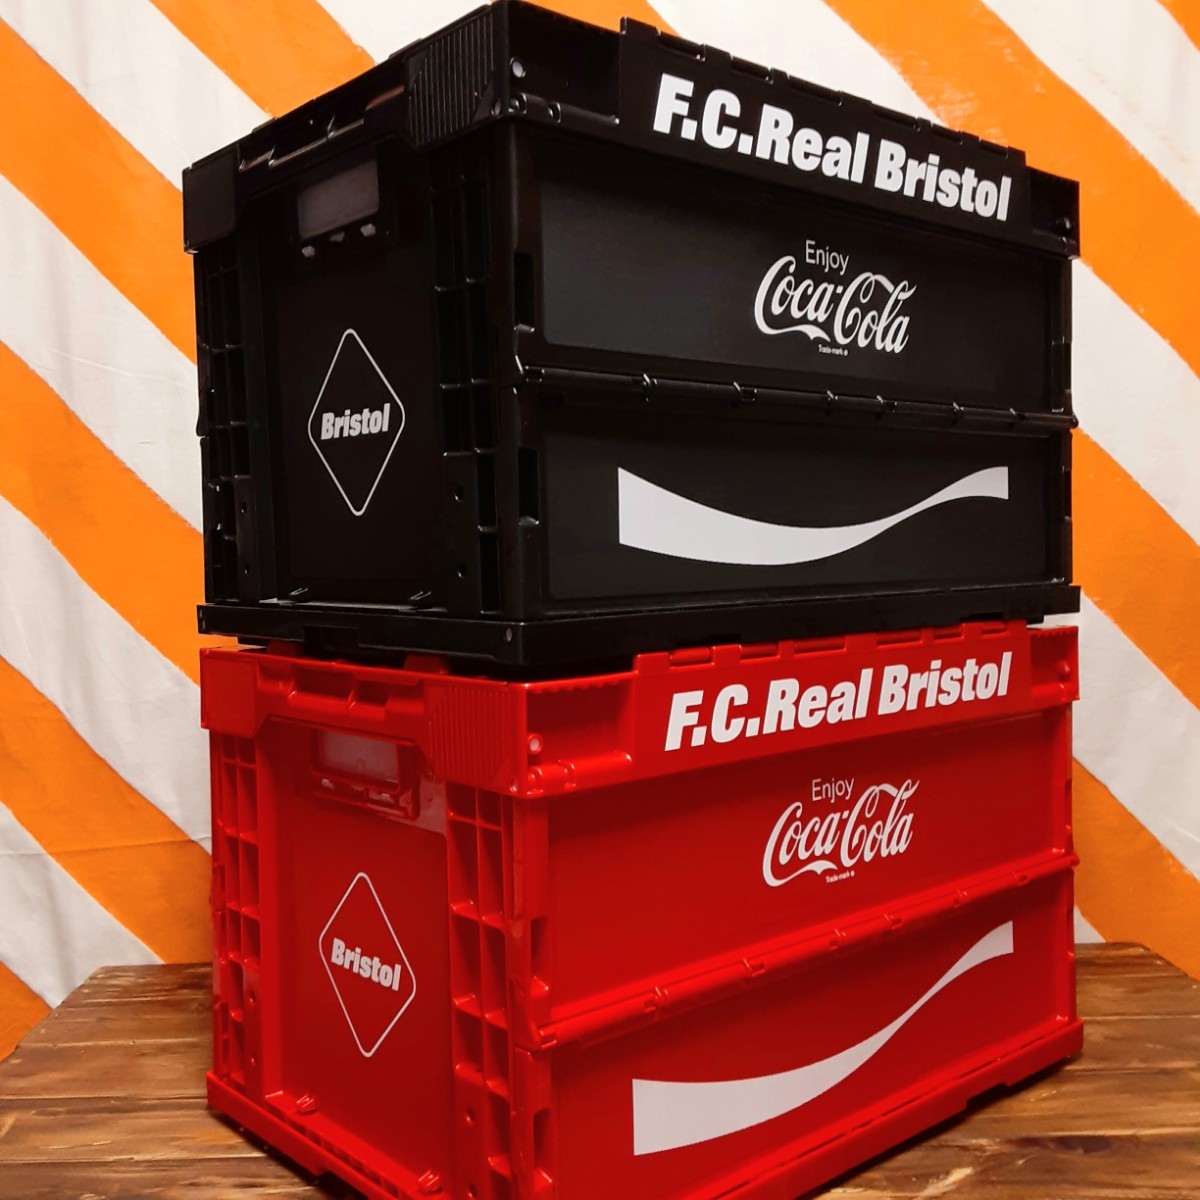 FCRB COCACOLA CONTAINER F C REAL BRISTOL BLACK RED 50L ブリストル